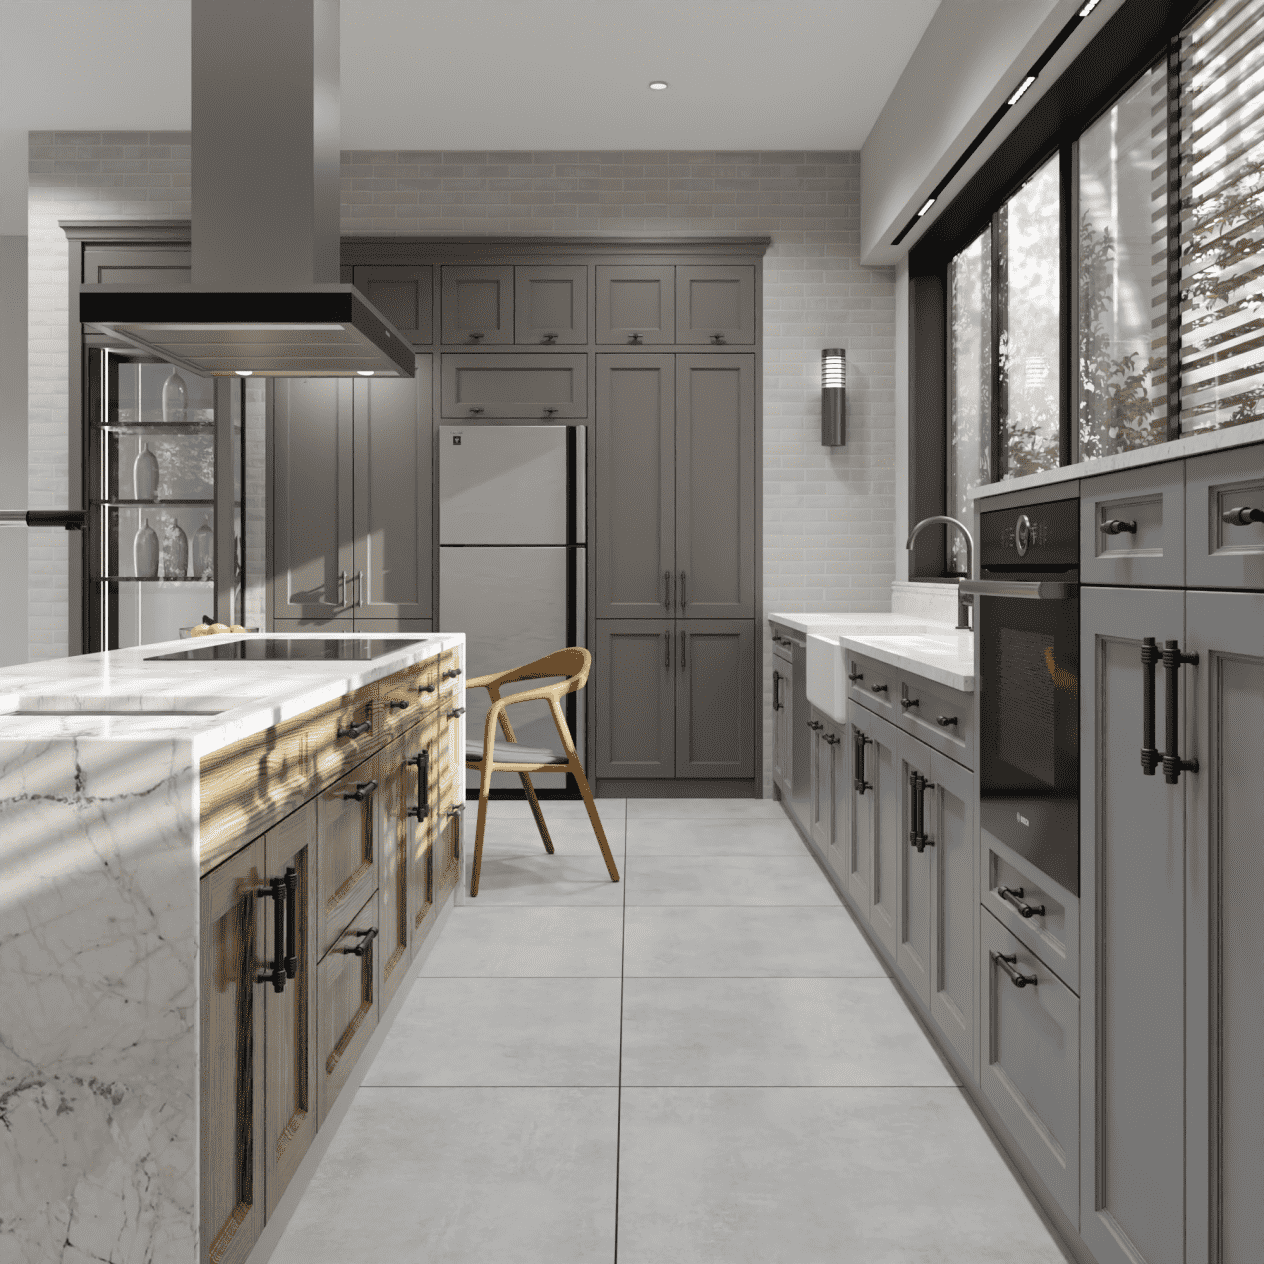 I will design your kitchen. image 4